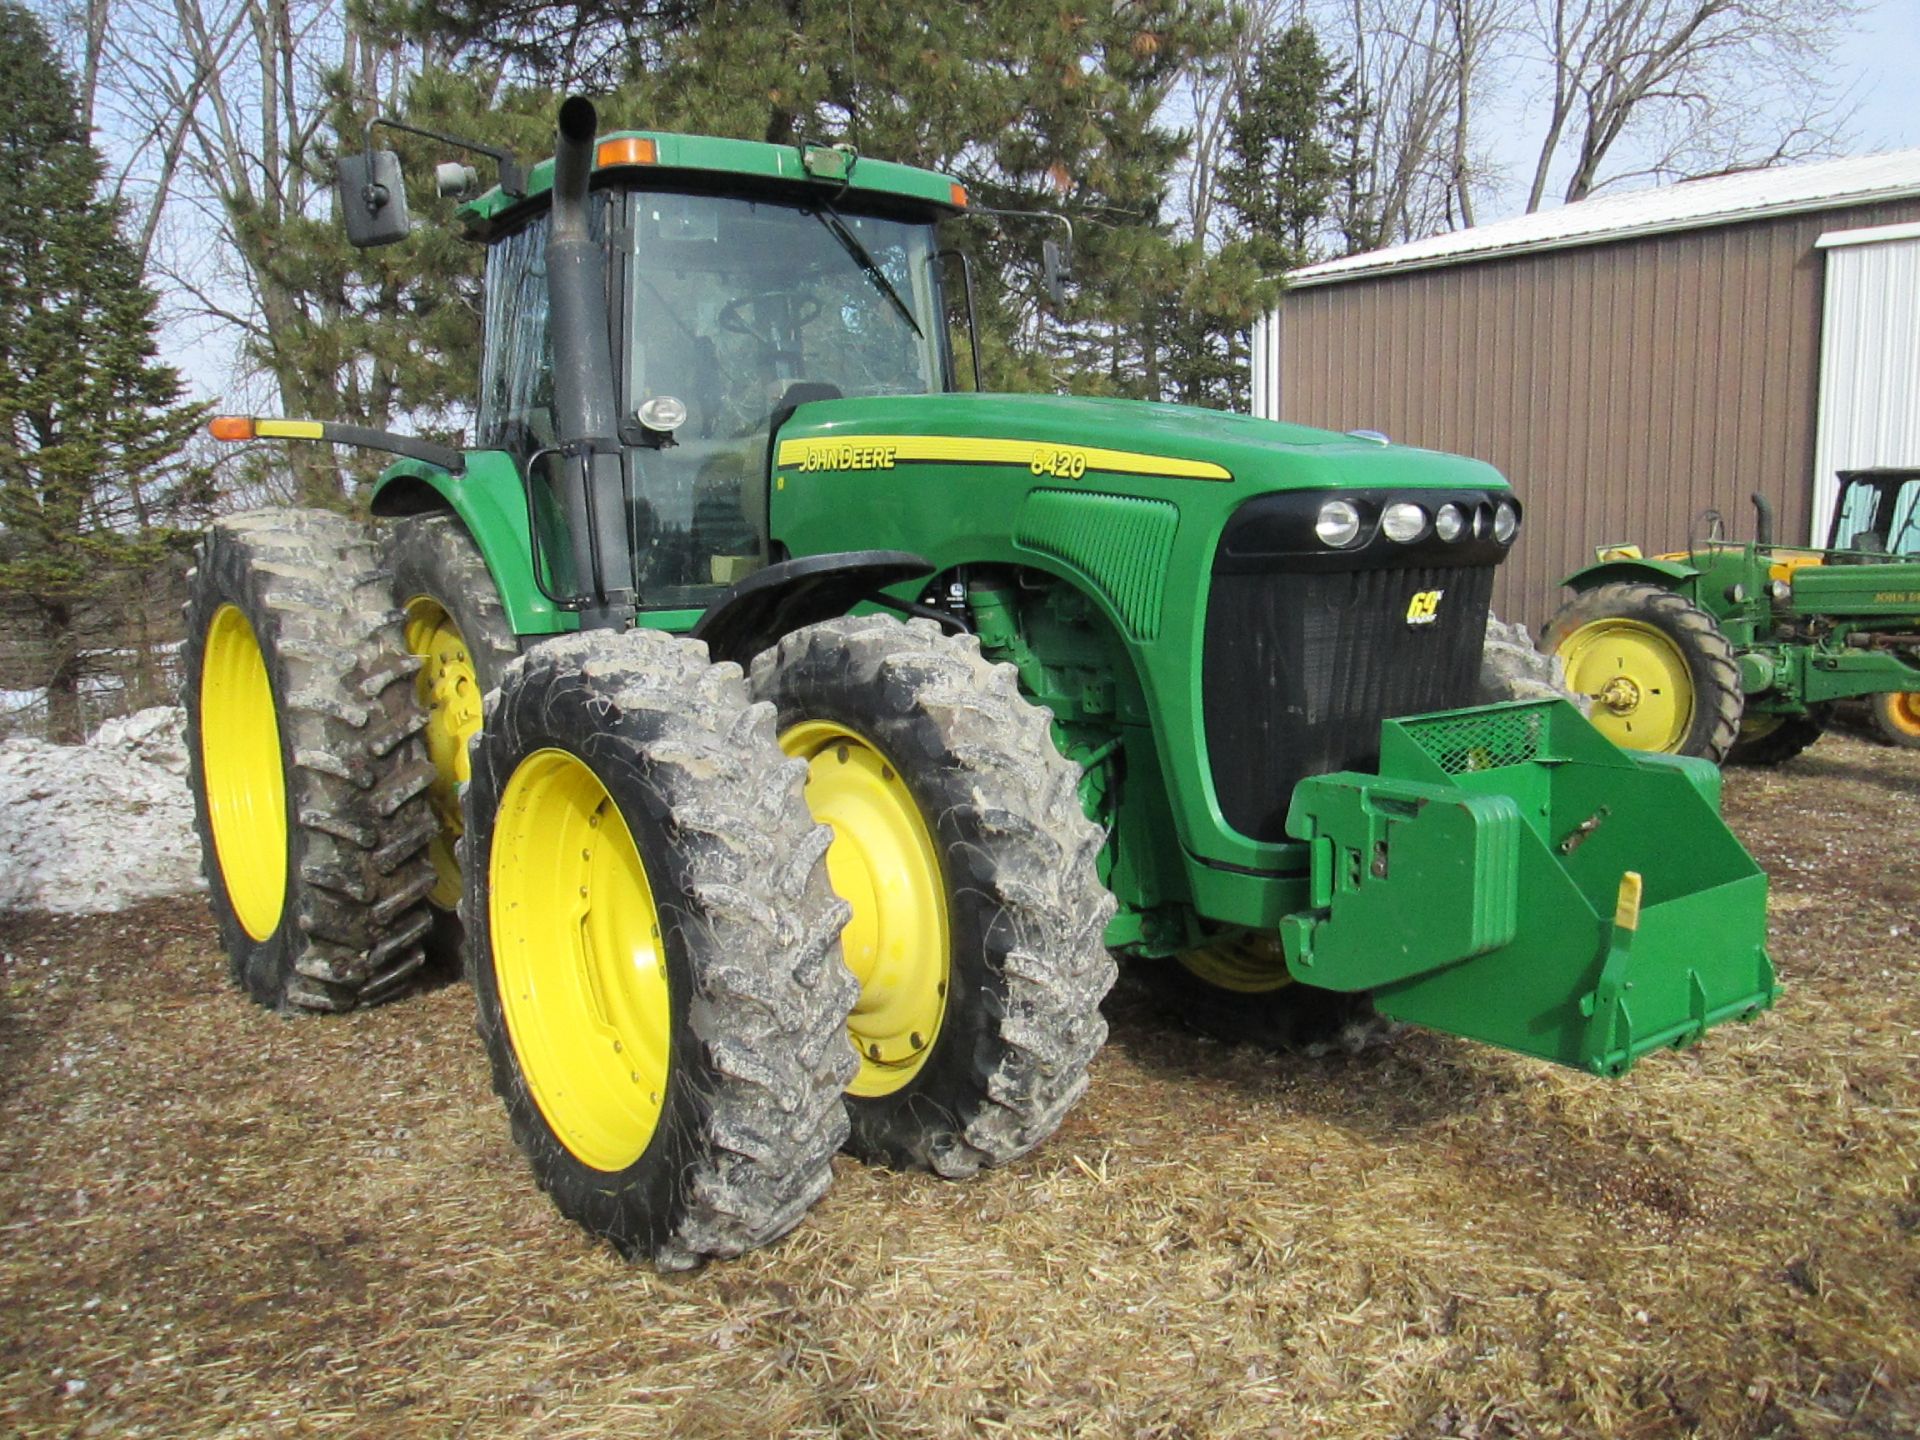 ’02 JD 8420 MFWD,(SN RW8420P007155)P.S.,FRONT SUSPENSION,GREENSTAR READY,480X50 DUALS,4921 HRS. - Image 2 of 19